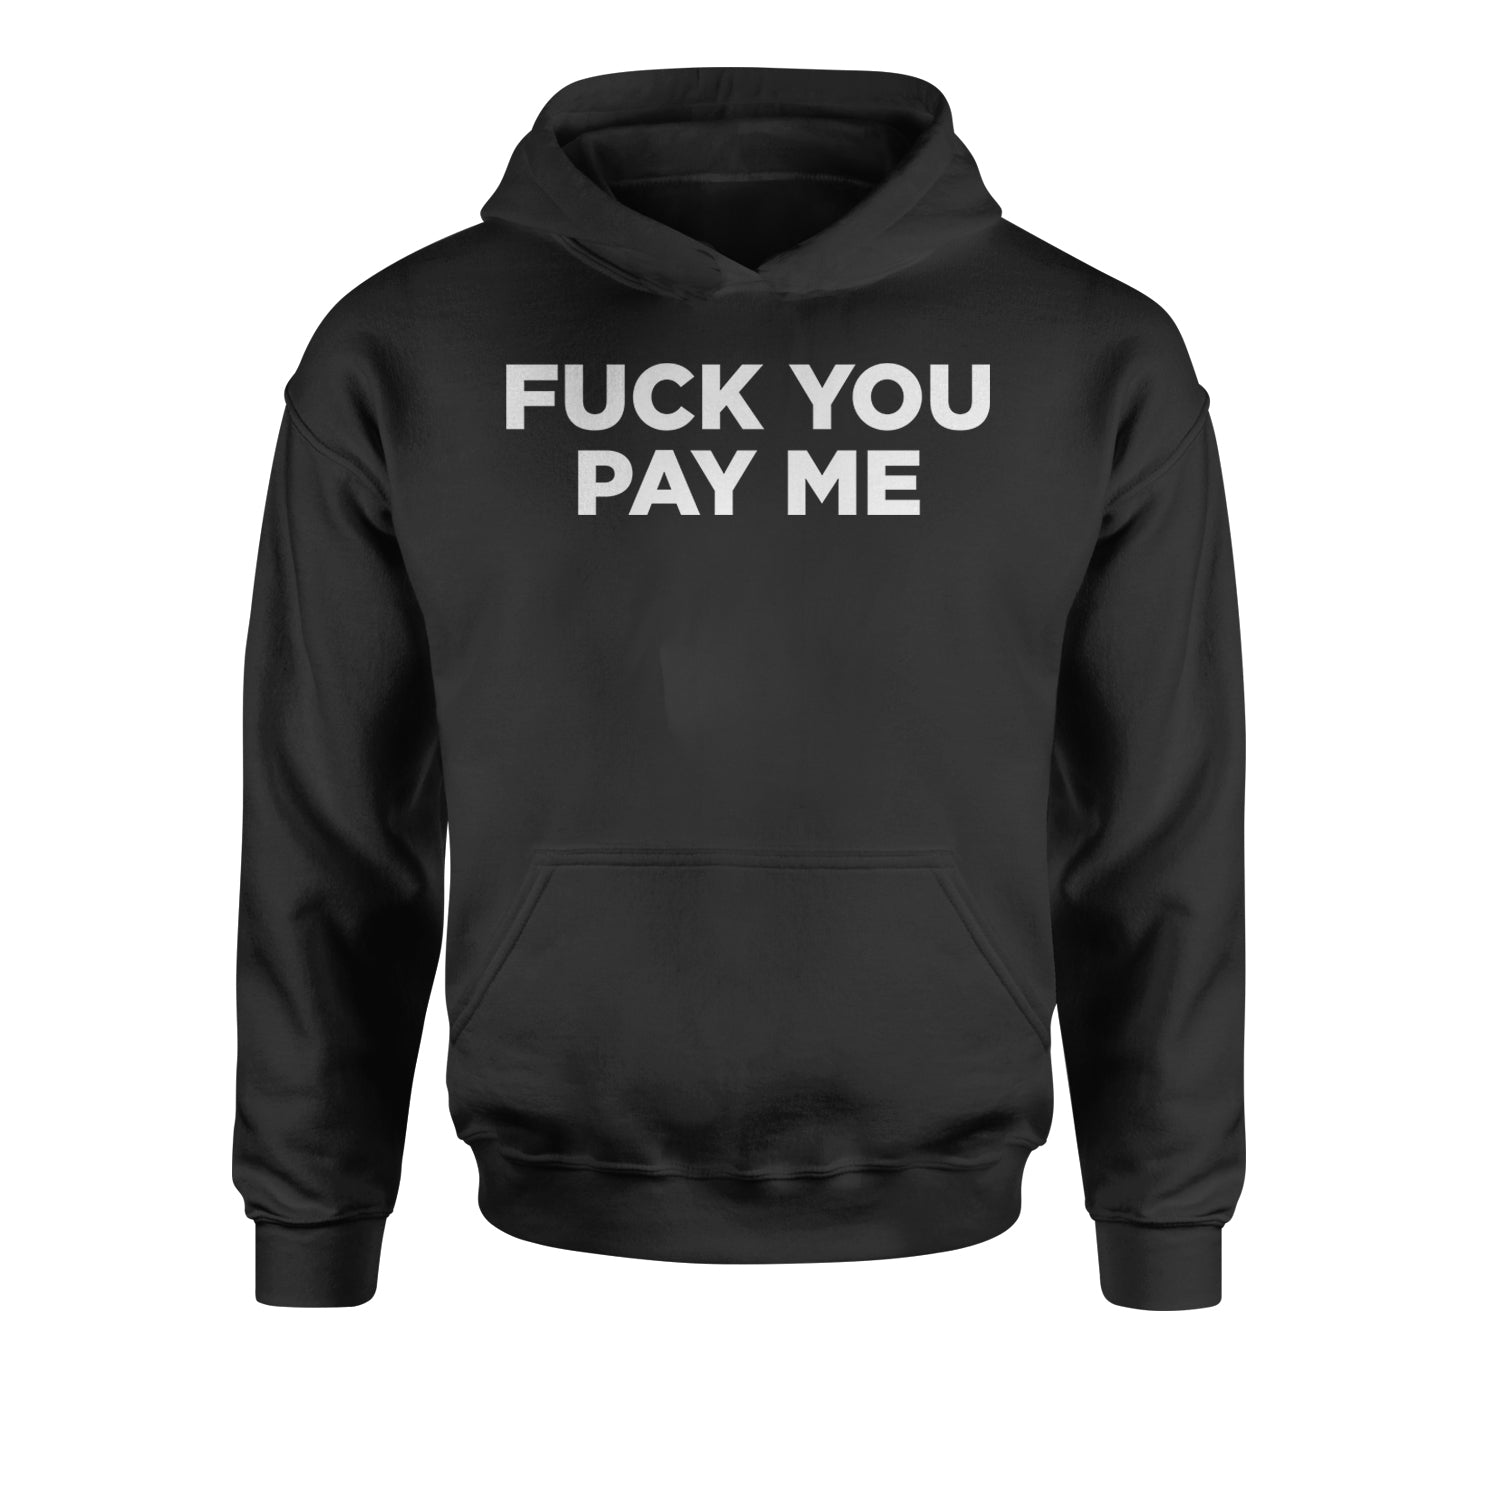 F-ck You Pay Me Demand Fair Pay Youth-Sized Hoodie